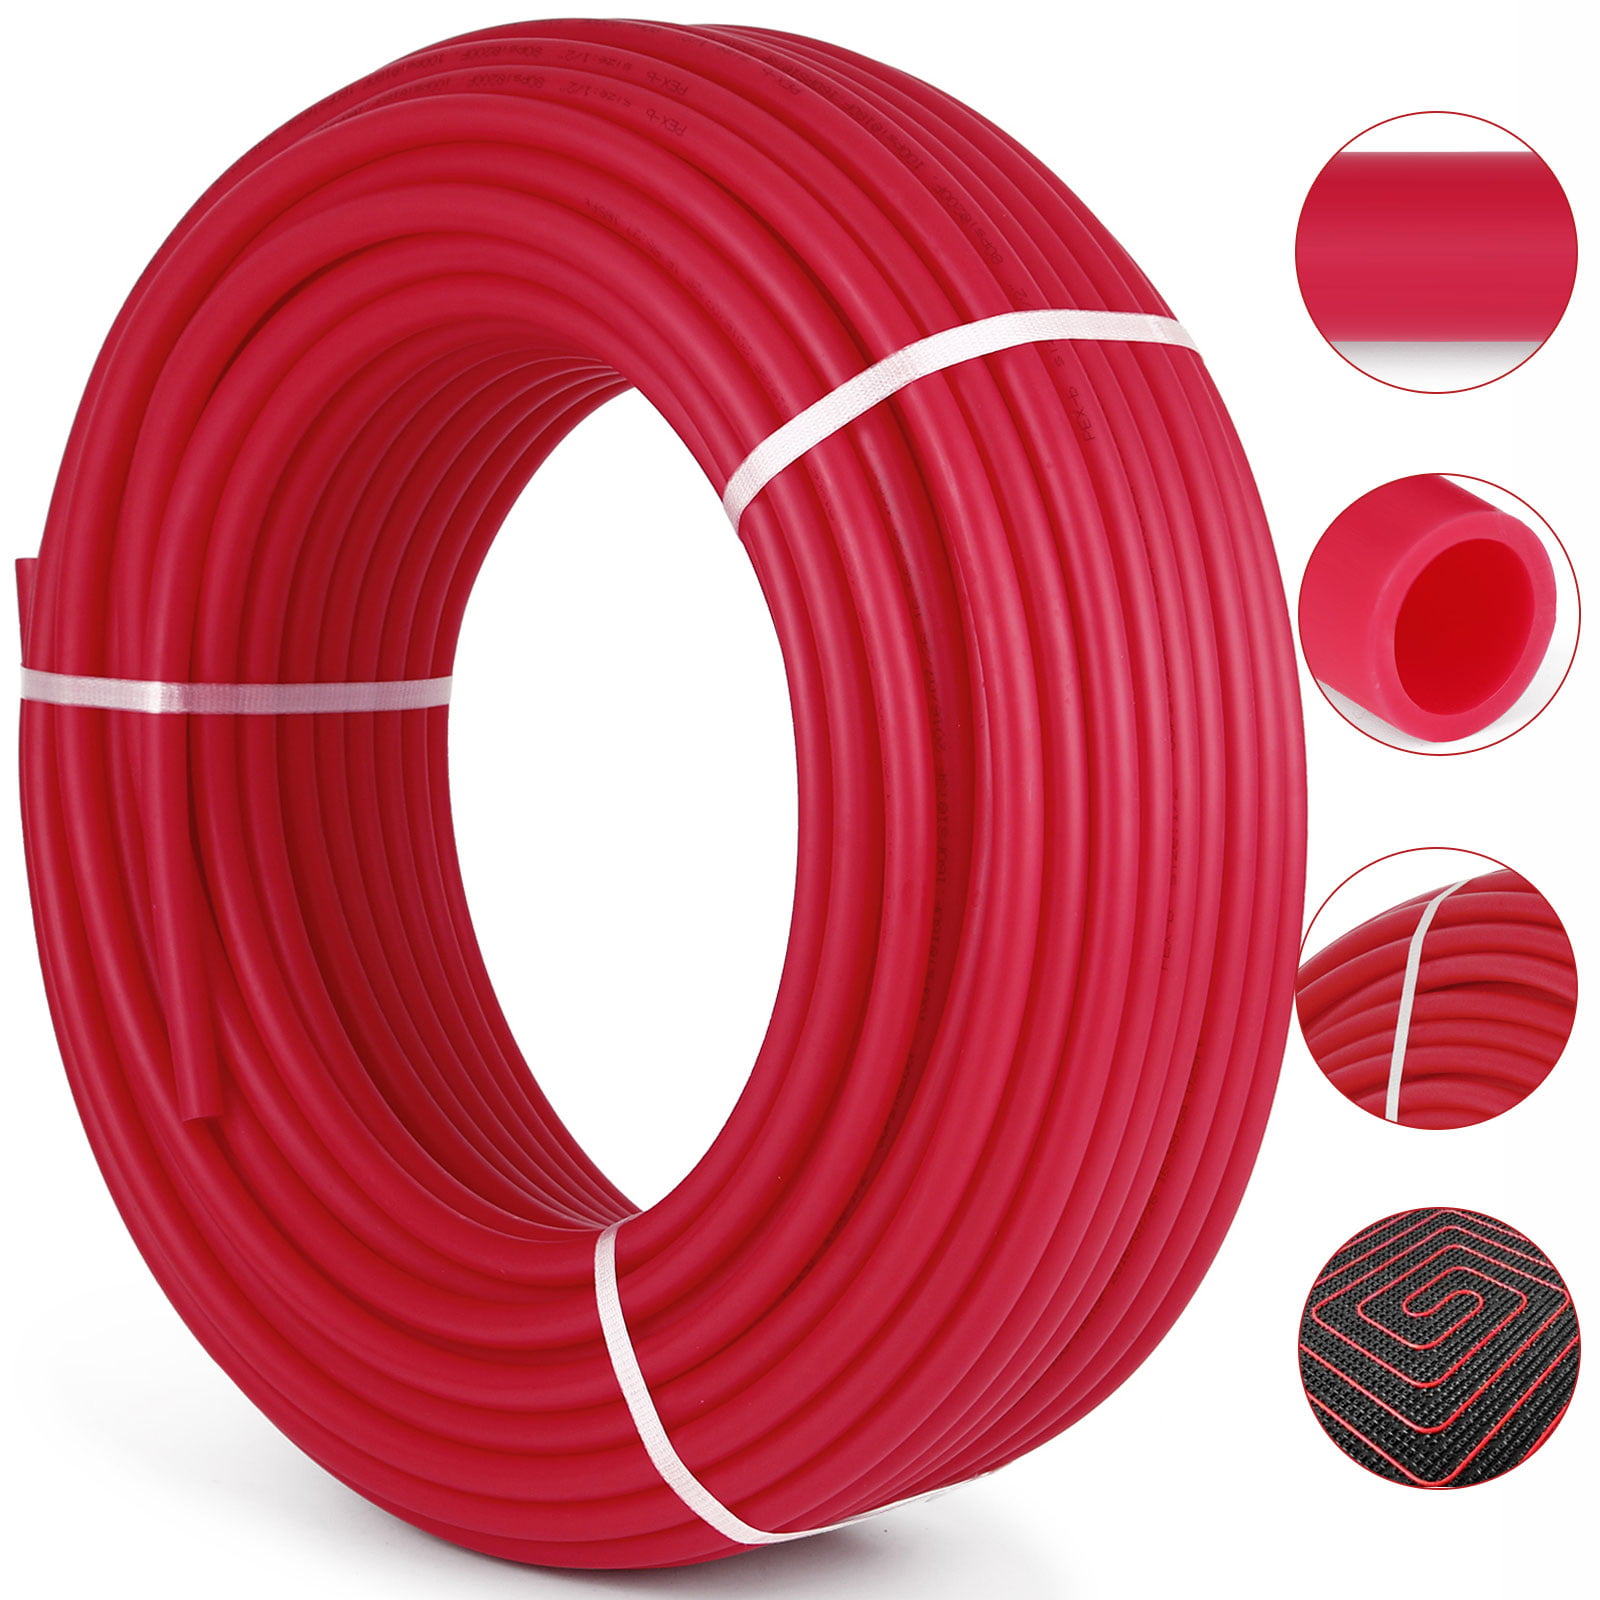 1/2" x 300ft Pex Tubing Oxygen Barrier O2 EVOH PexB Red Radiant Heating 2 ITEMS 